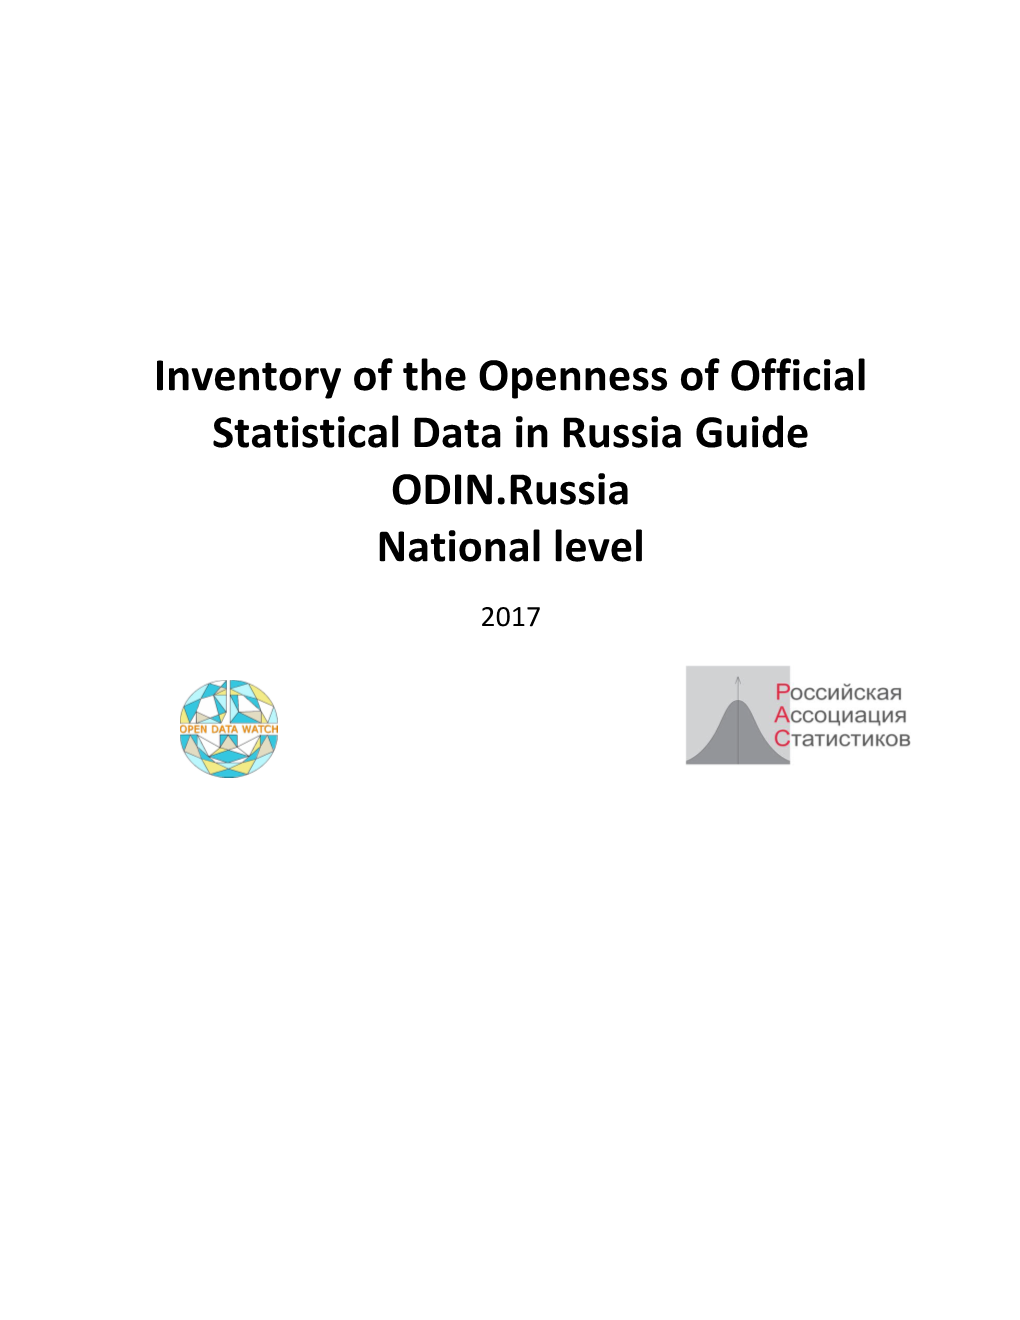 Inventory of the Openness of Official Statistical Data in Russia. ODIN.Russia